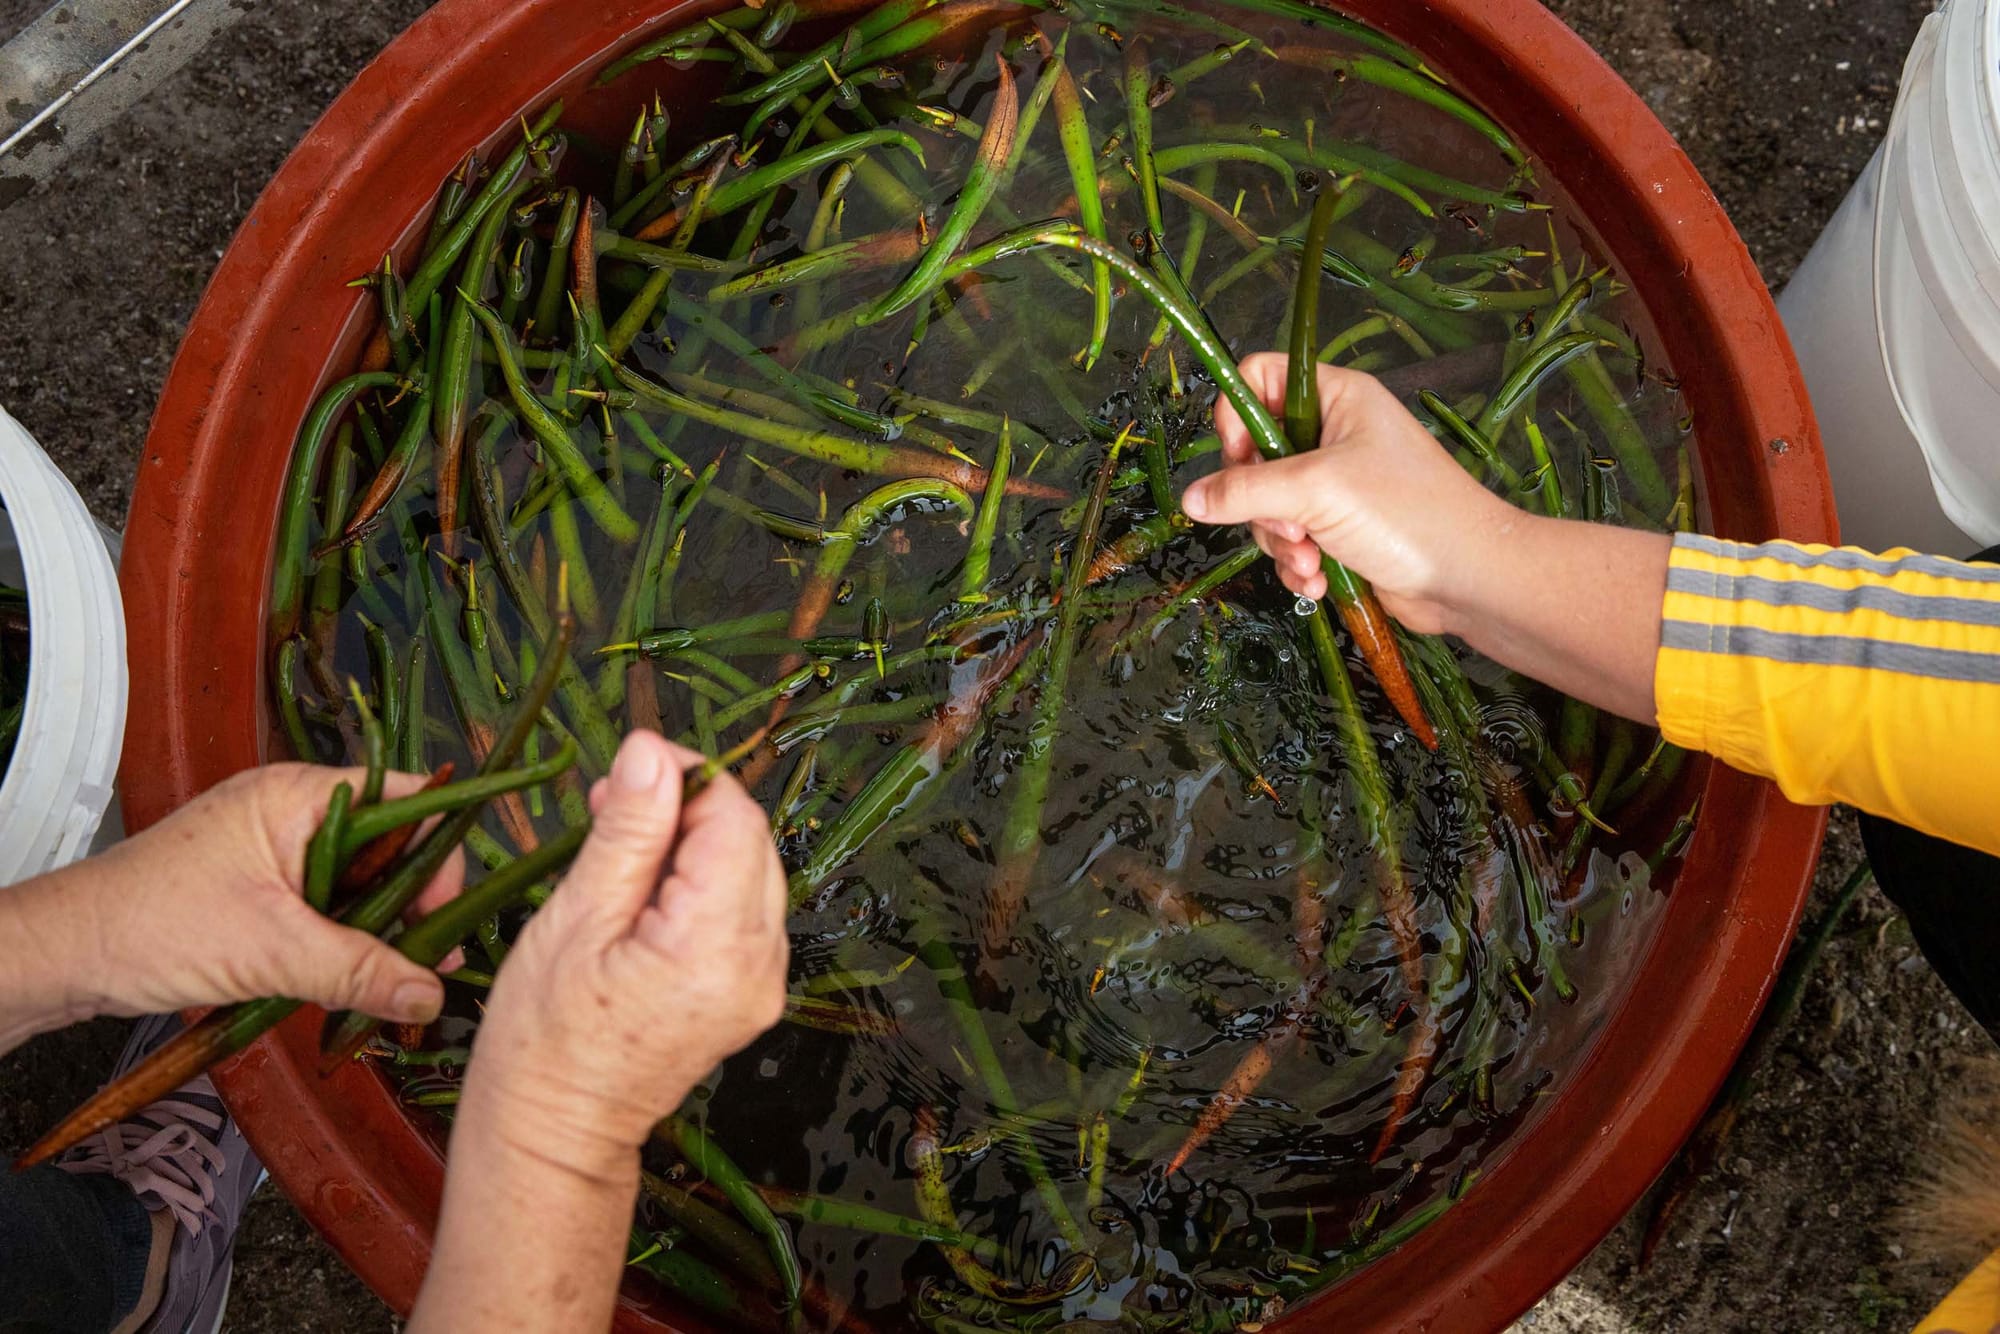 Looking down at a bucket full of water and mangrove propagules